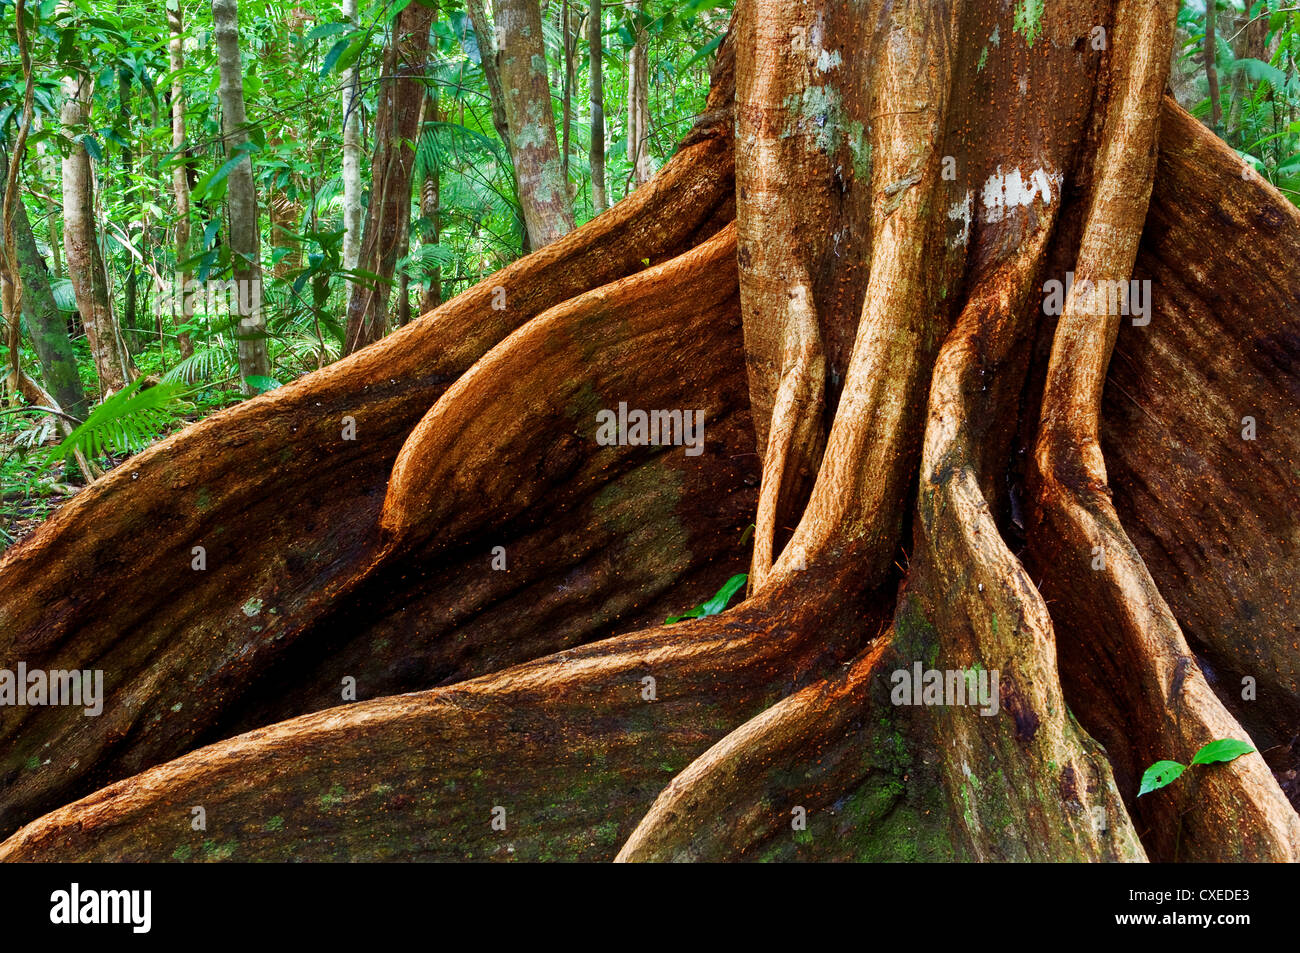 Giant root of an ancient tropical tree in Daintree National Park. Stock Photo